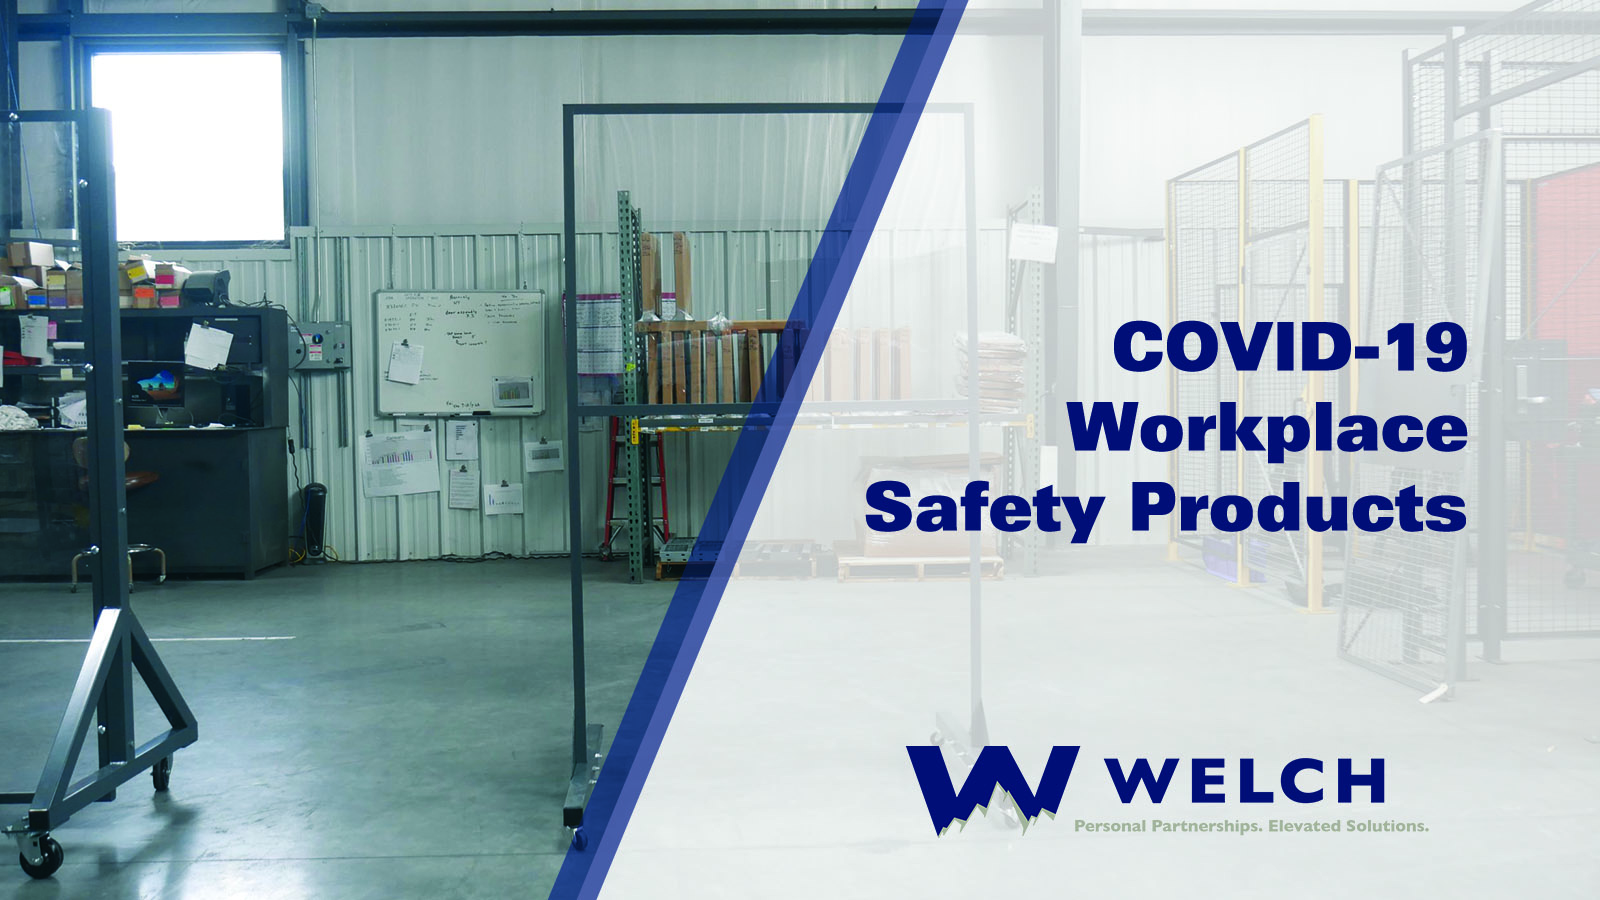 COVID-19 Workplace Safety Products 6